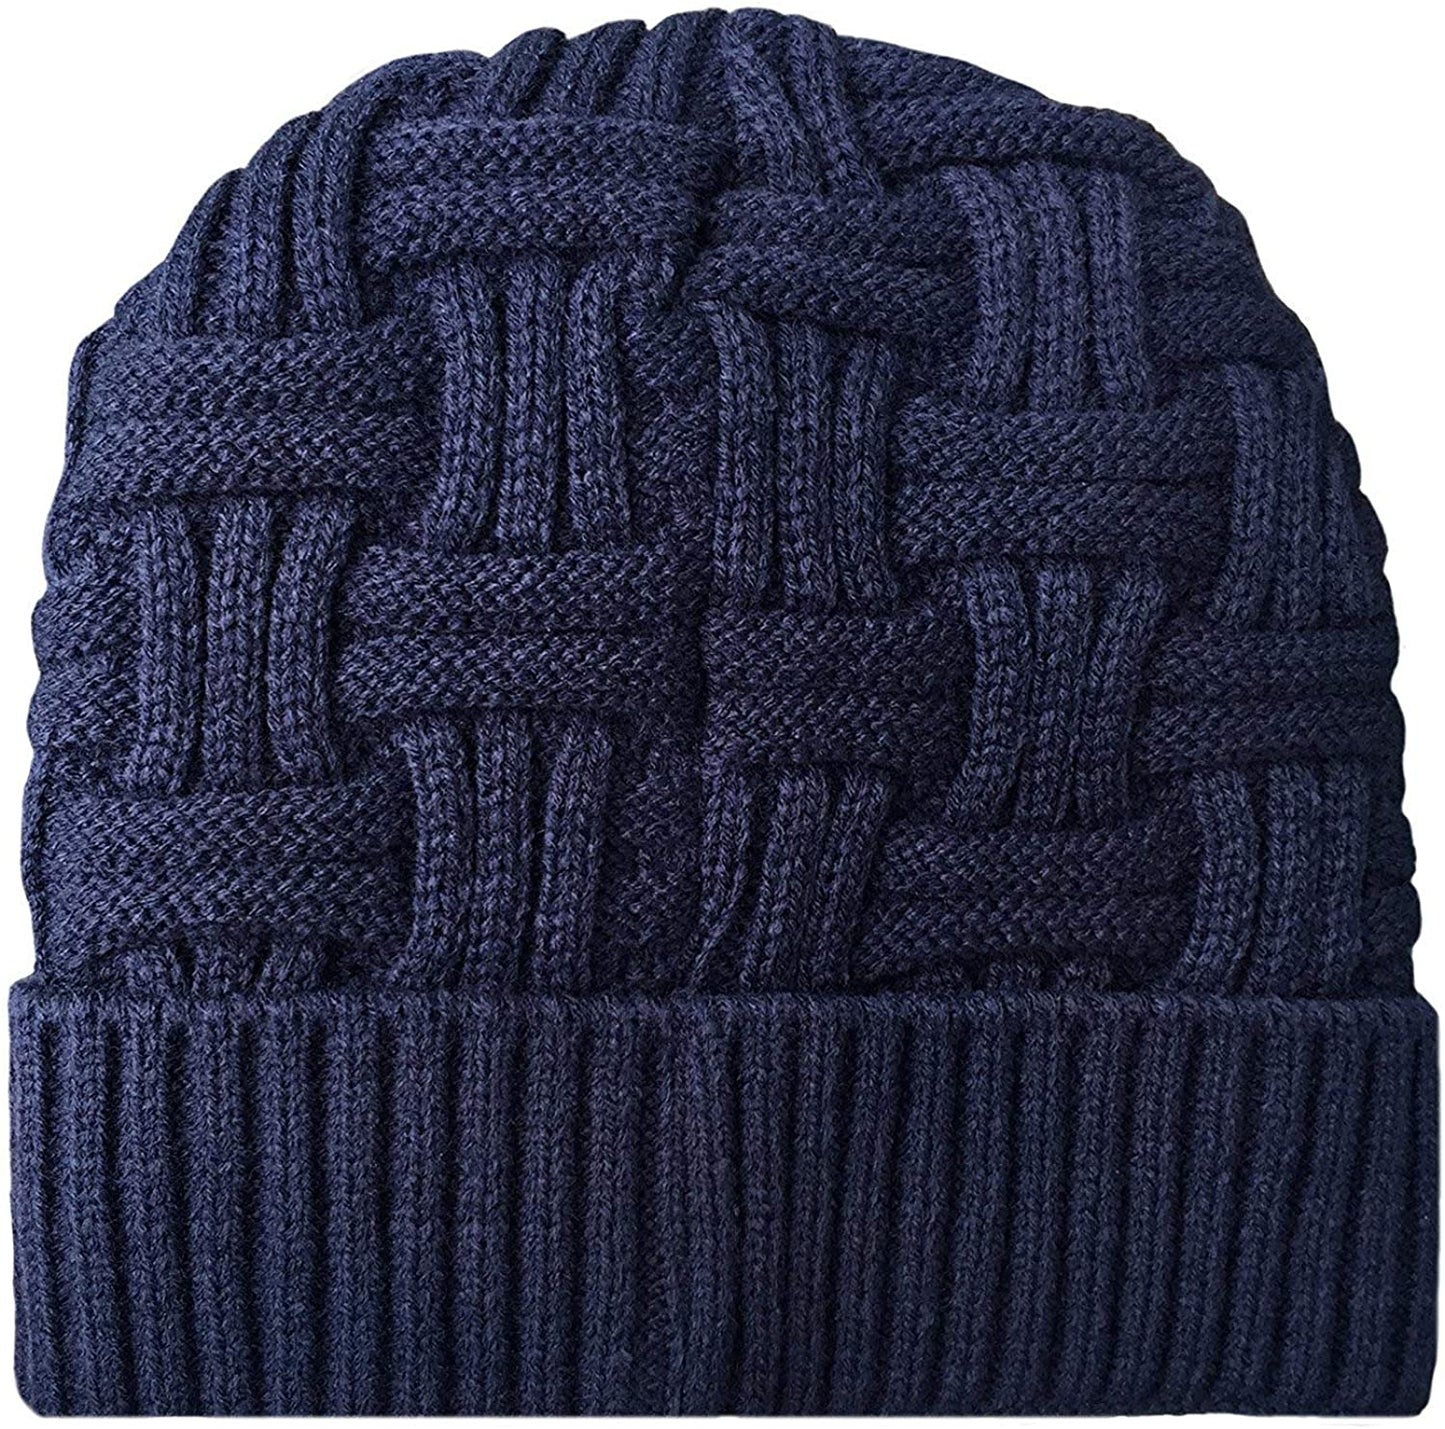 Winter Knitted Wool Thick Baggy Slouchy Beanie Skull Cap